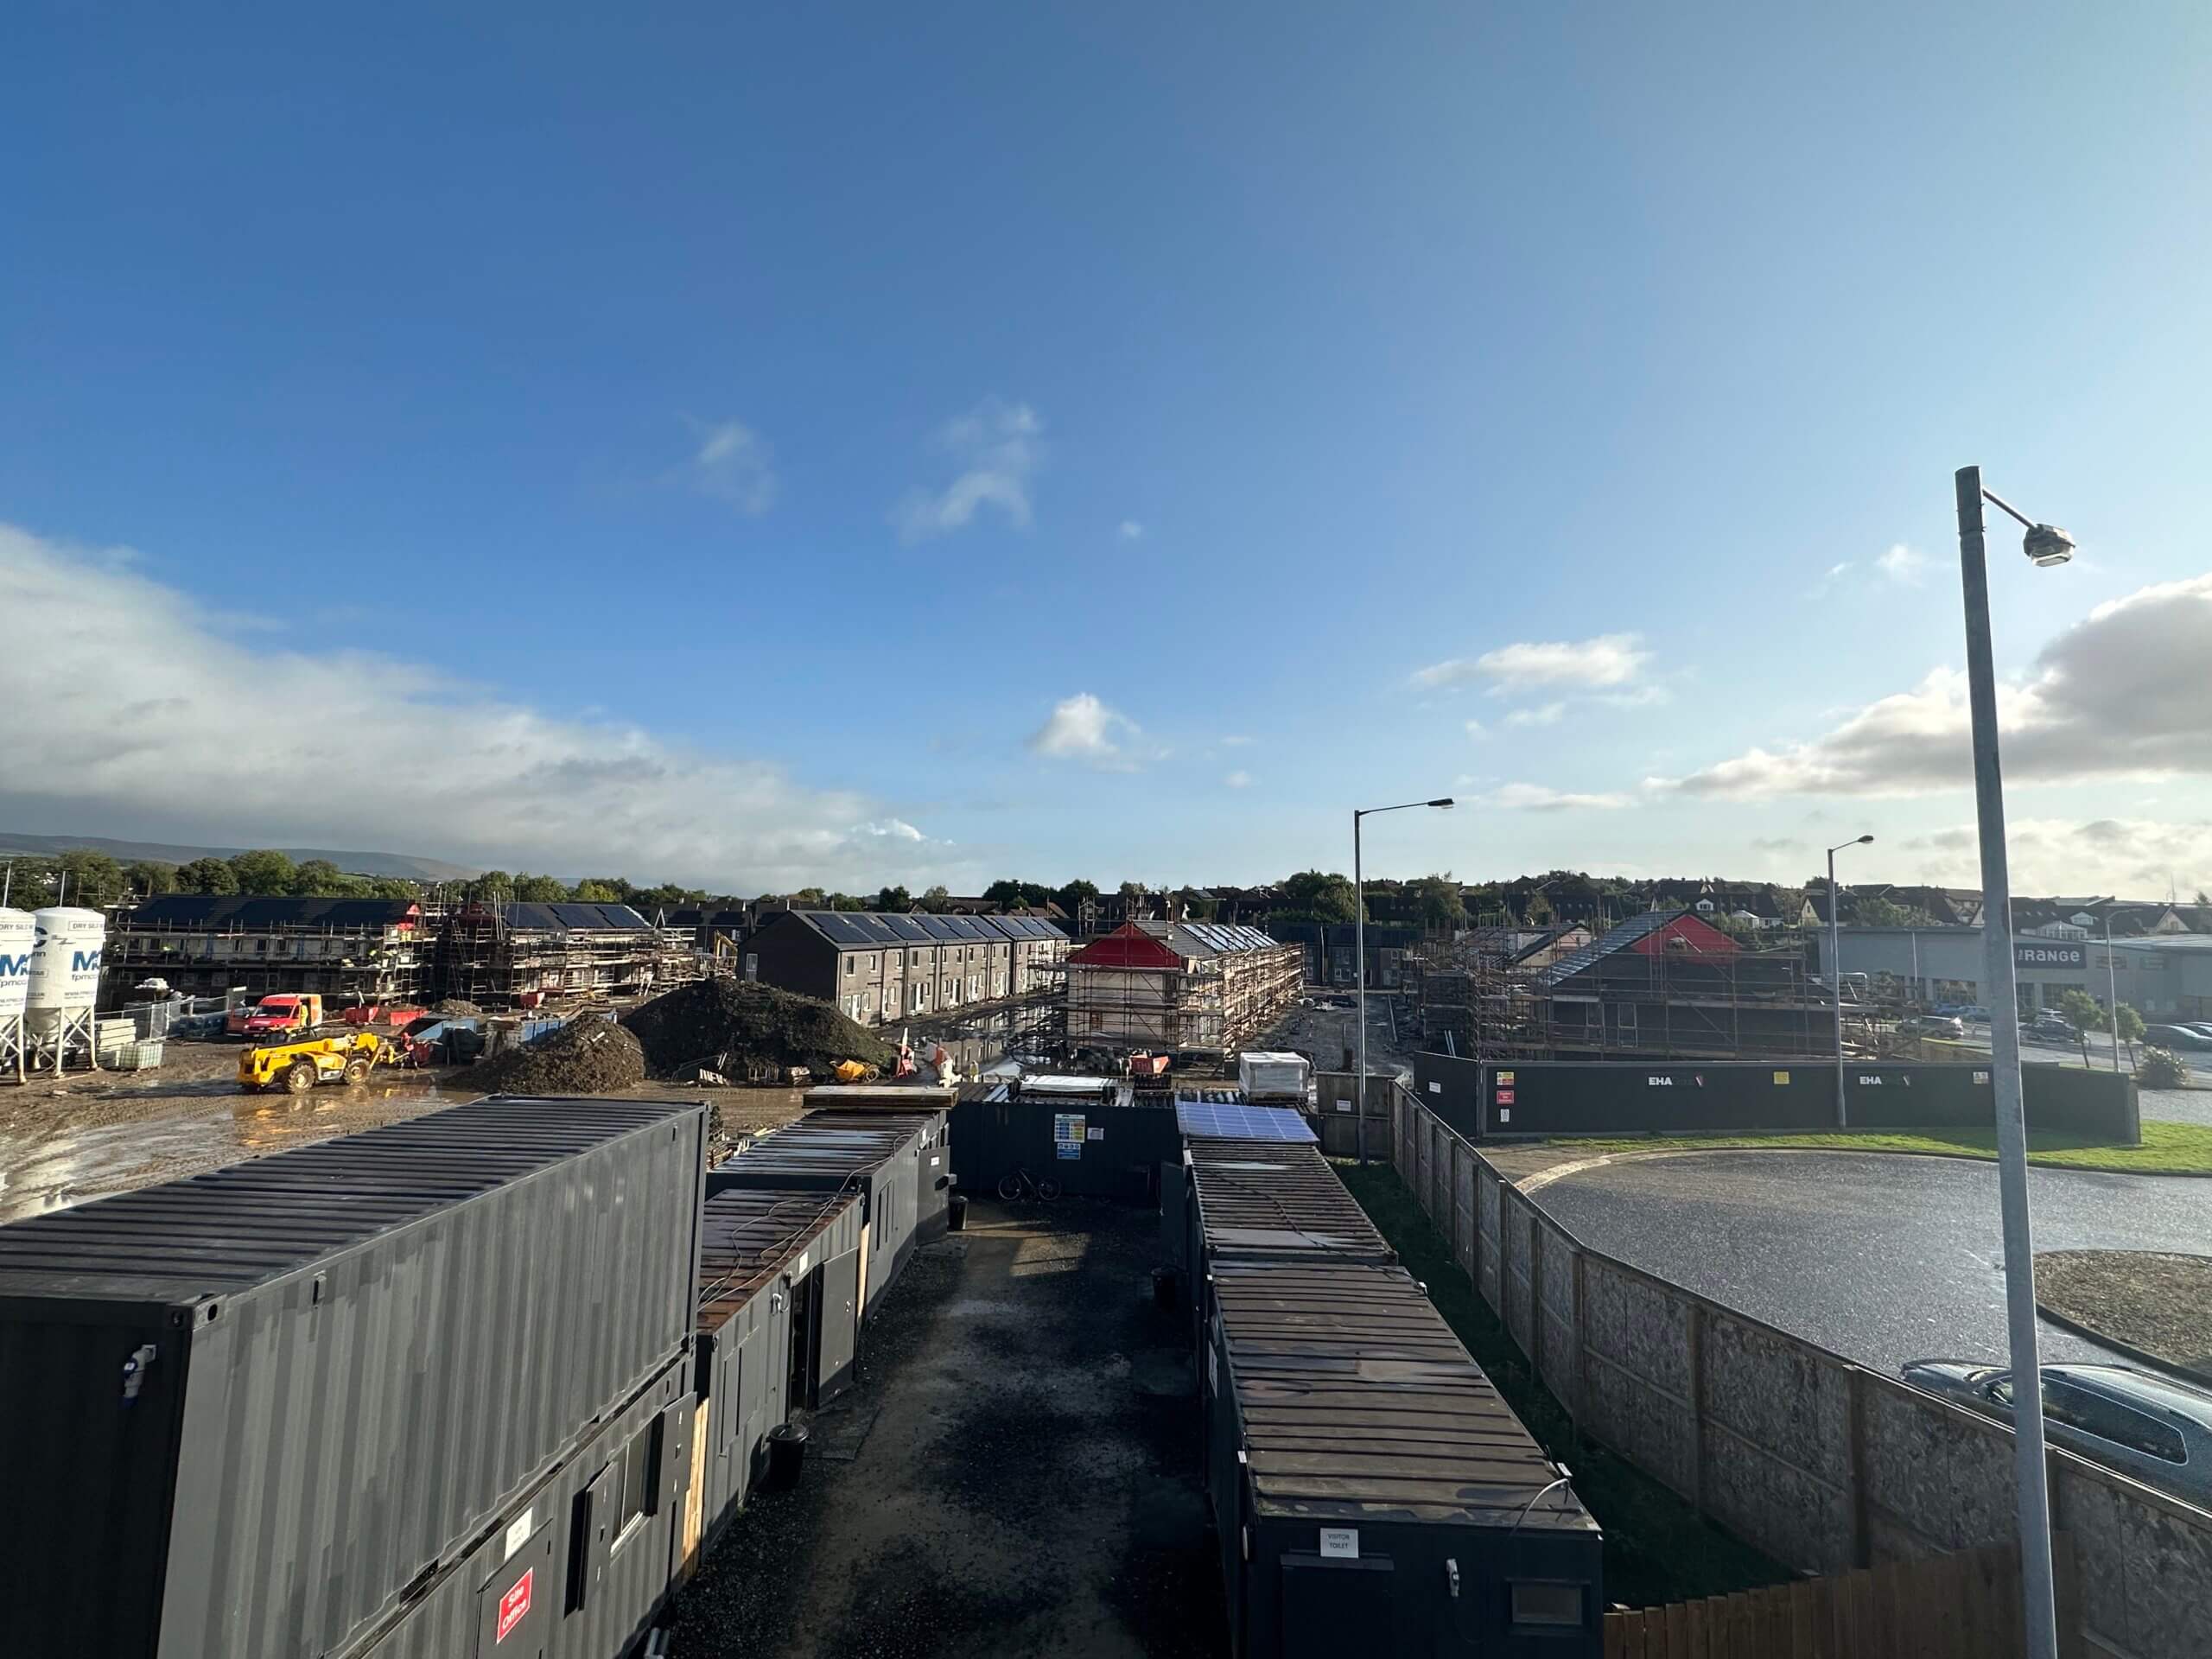 20230925 085041219 iOS scaled - Project Update: Buncrana Road, Derry